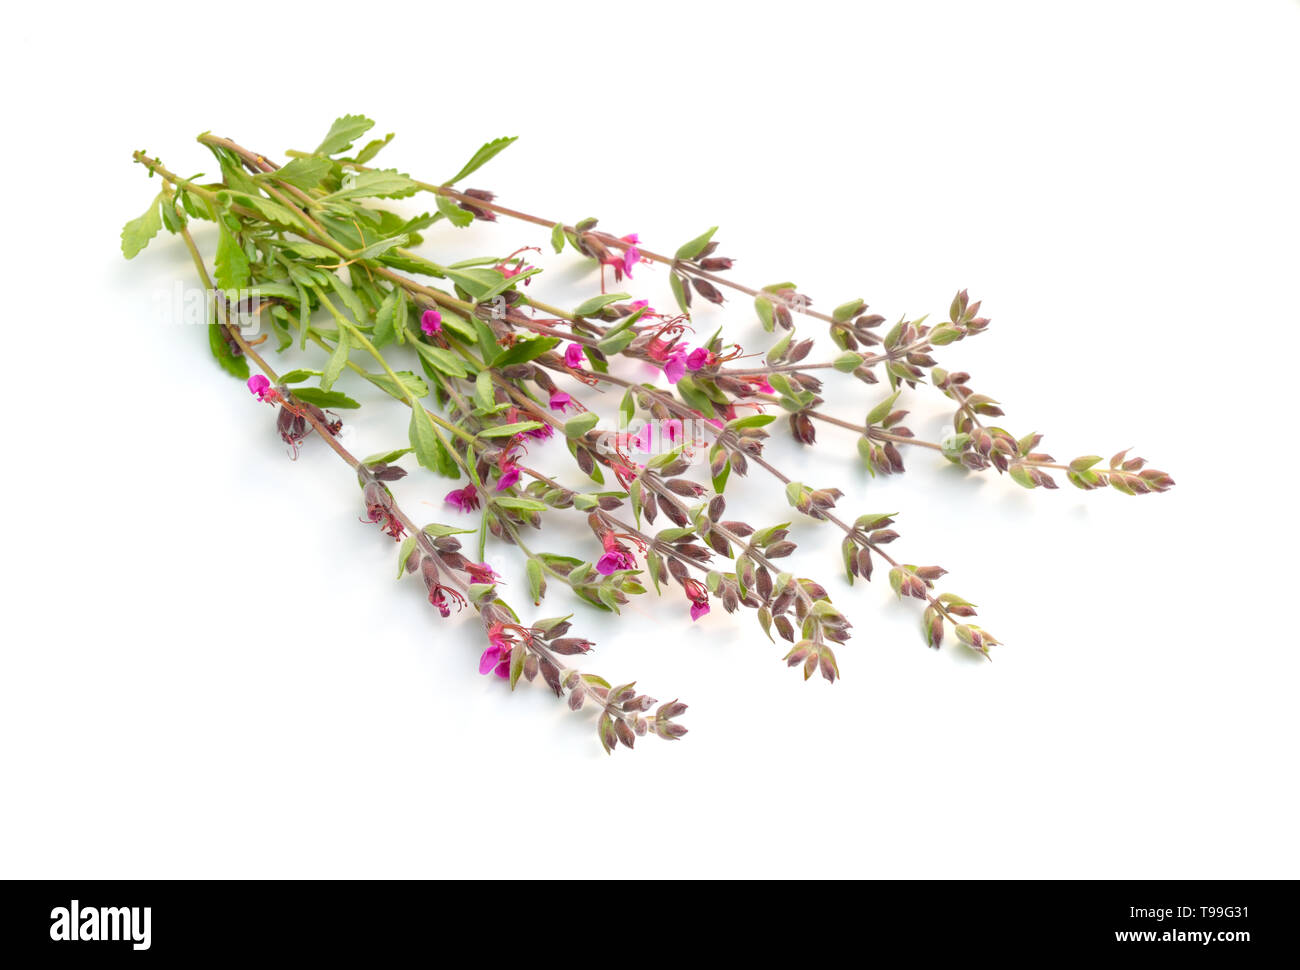 Teucrium or germanders. Isolated on white background. Stock Photo